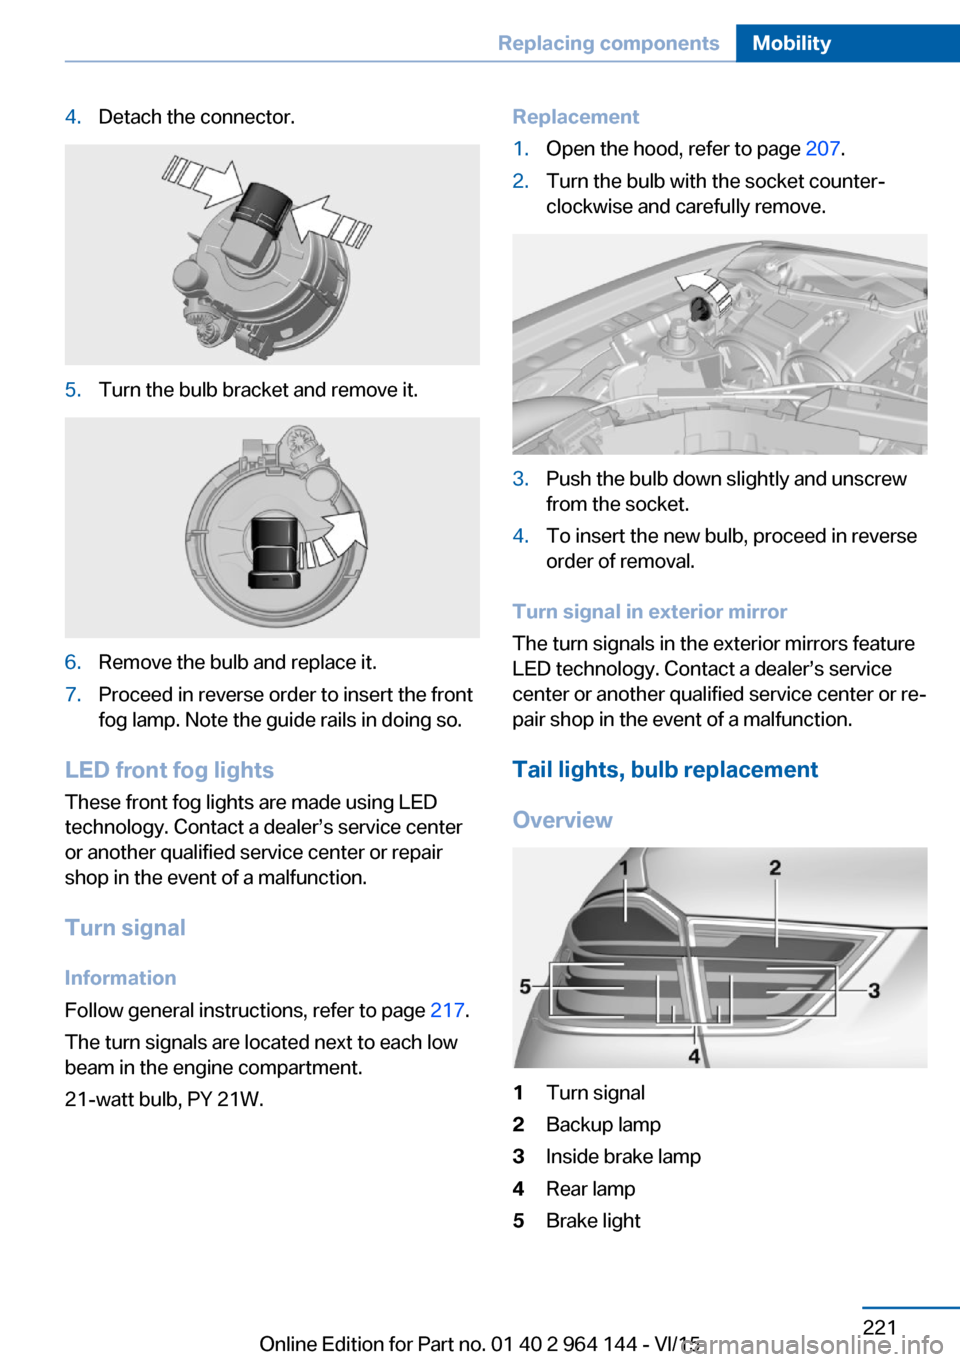 BMW X4 2015 F26 Owners Manual 4.Detach the connector.5.Turn the bulb bracket and remove it.6.Remove the bulb and replace it.7.Proceed in reverse order to insert the front
fog lamp. Note the guide rails in doing so.
LED front fog l